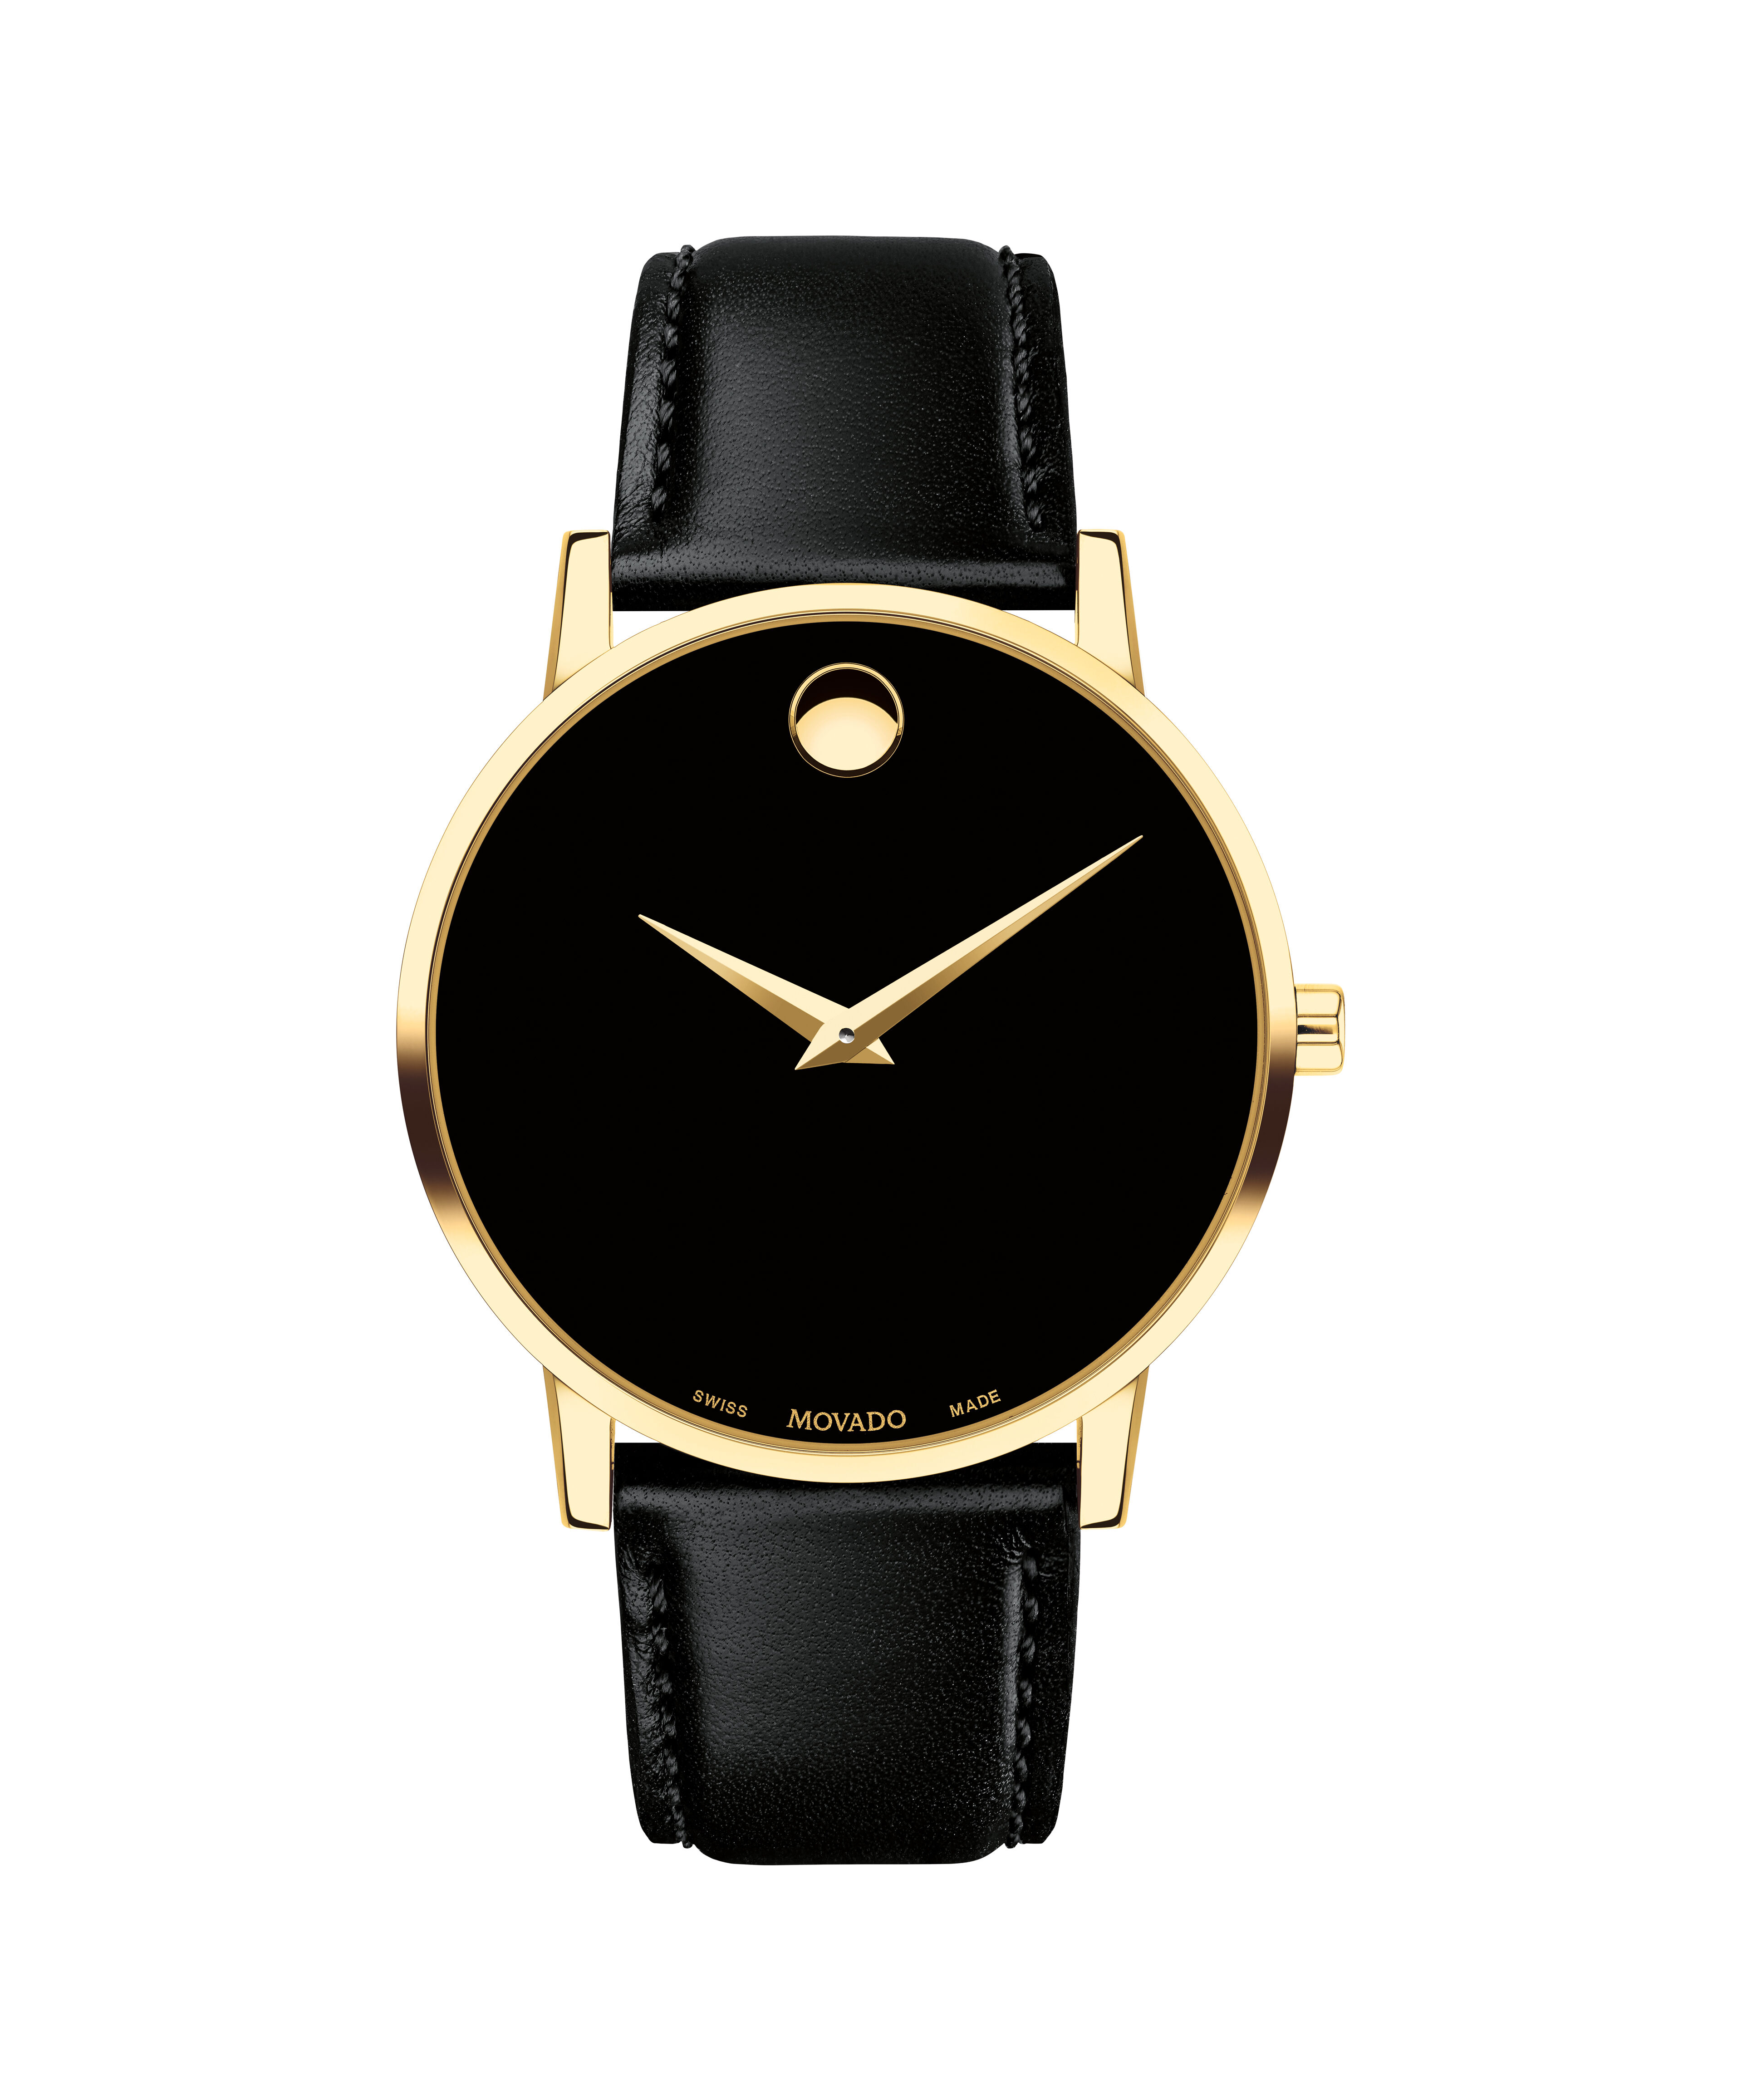 Movado Zenith Swiss Museum Manual Winding Yellow Gold Excellent Condition Just Serviced.